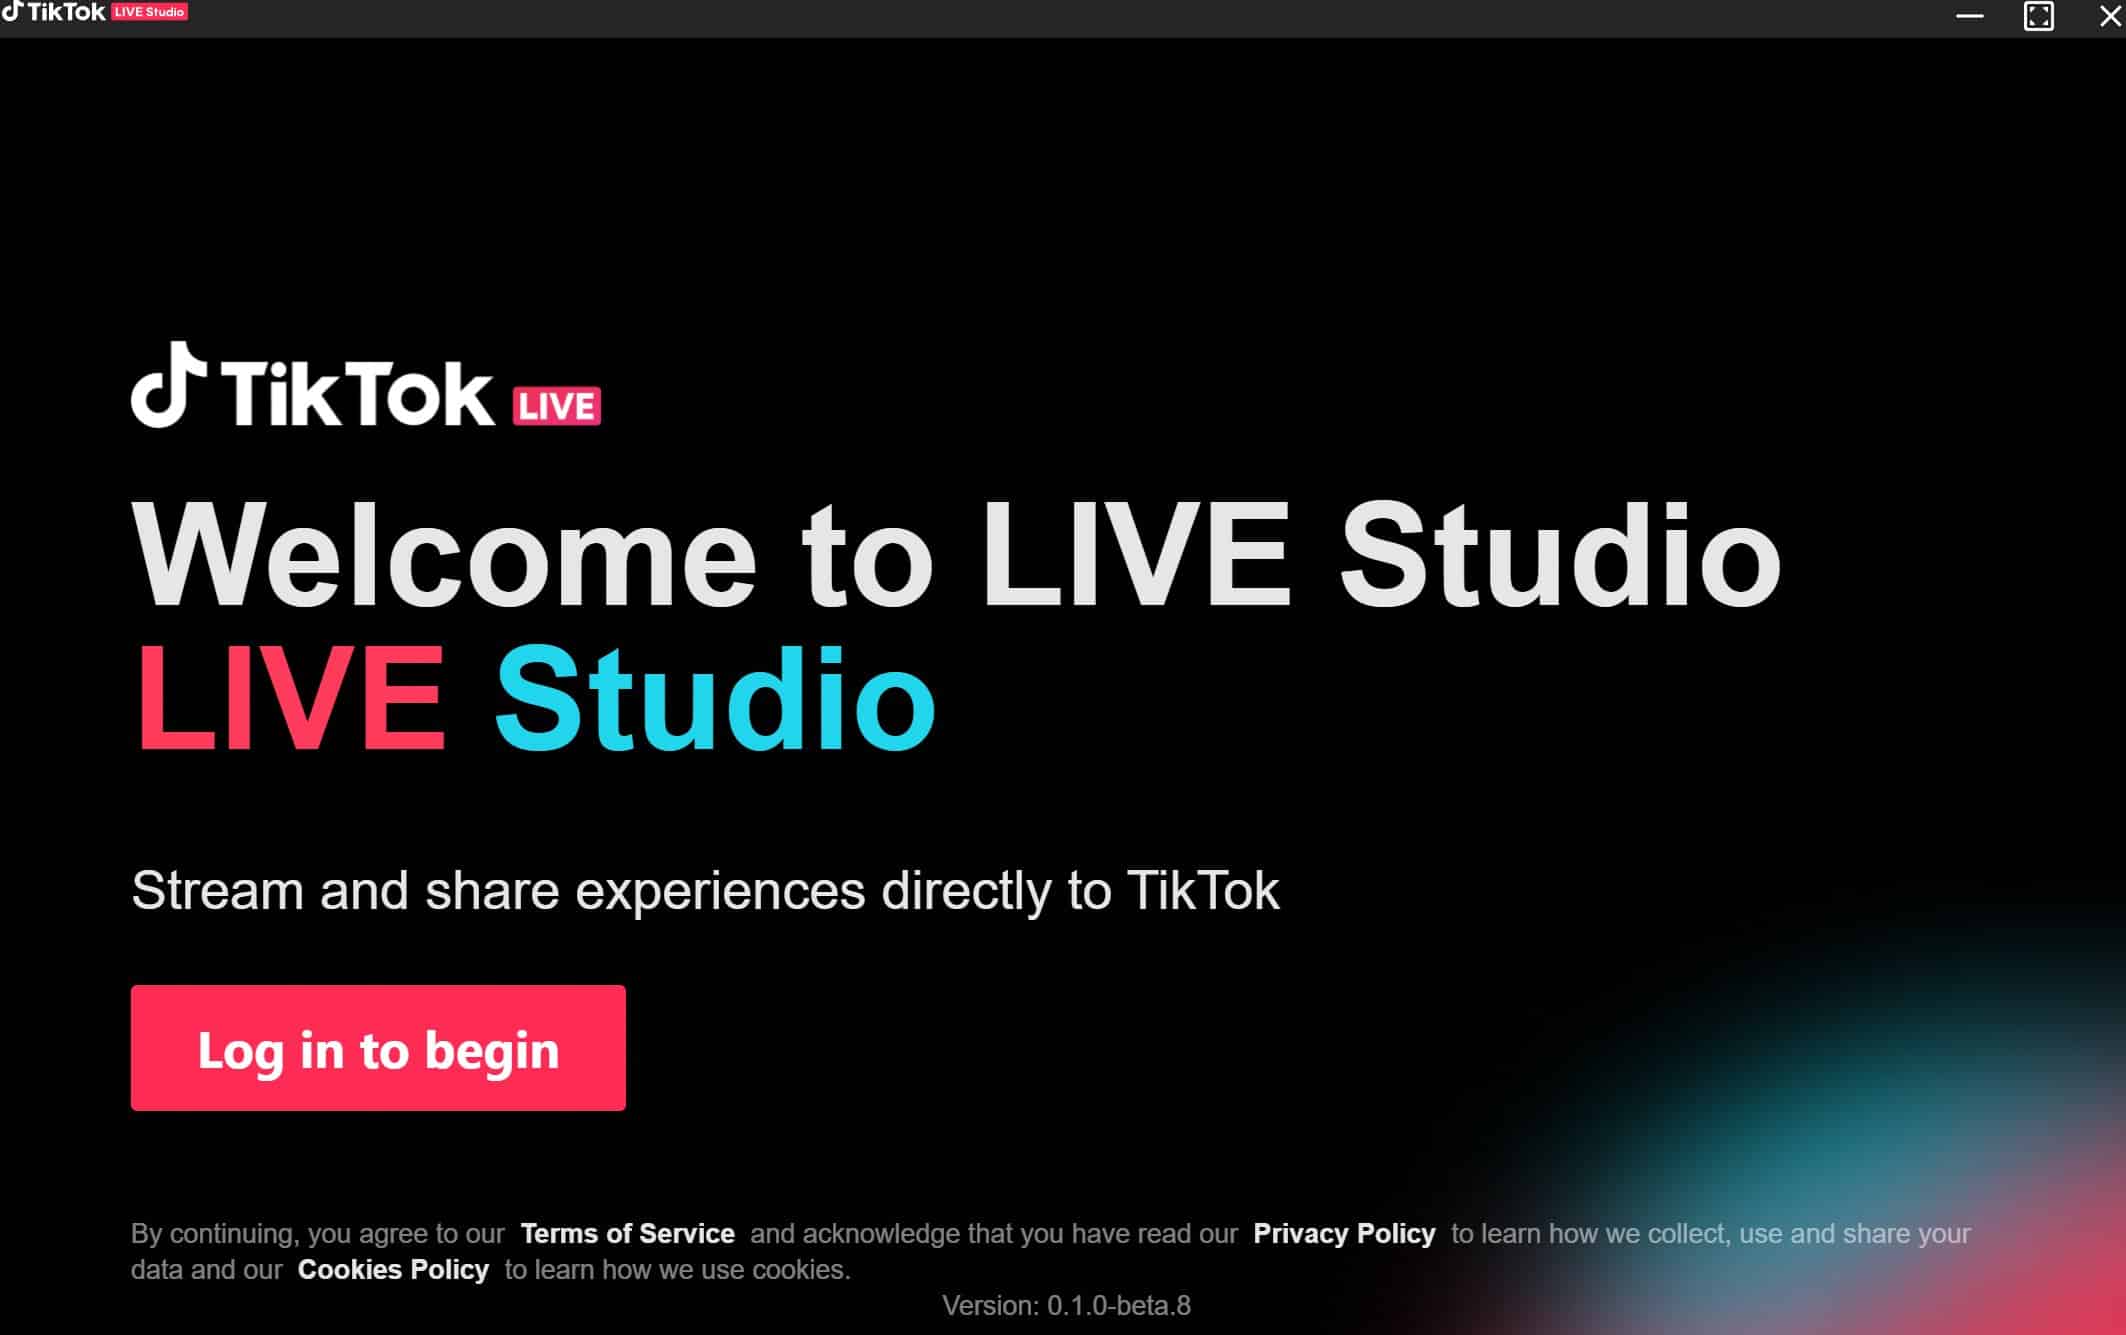 Ditch Twitch? Download TikTok LIVE Studio to test out the new desktop